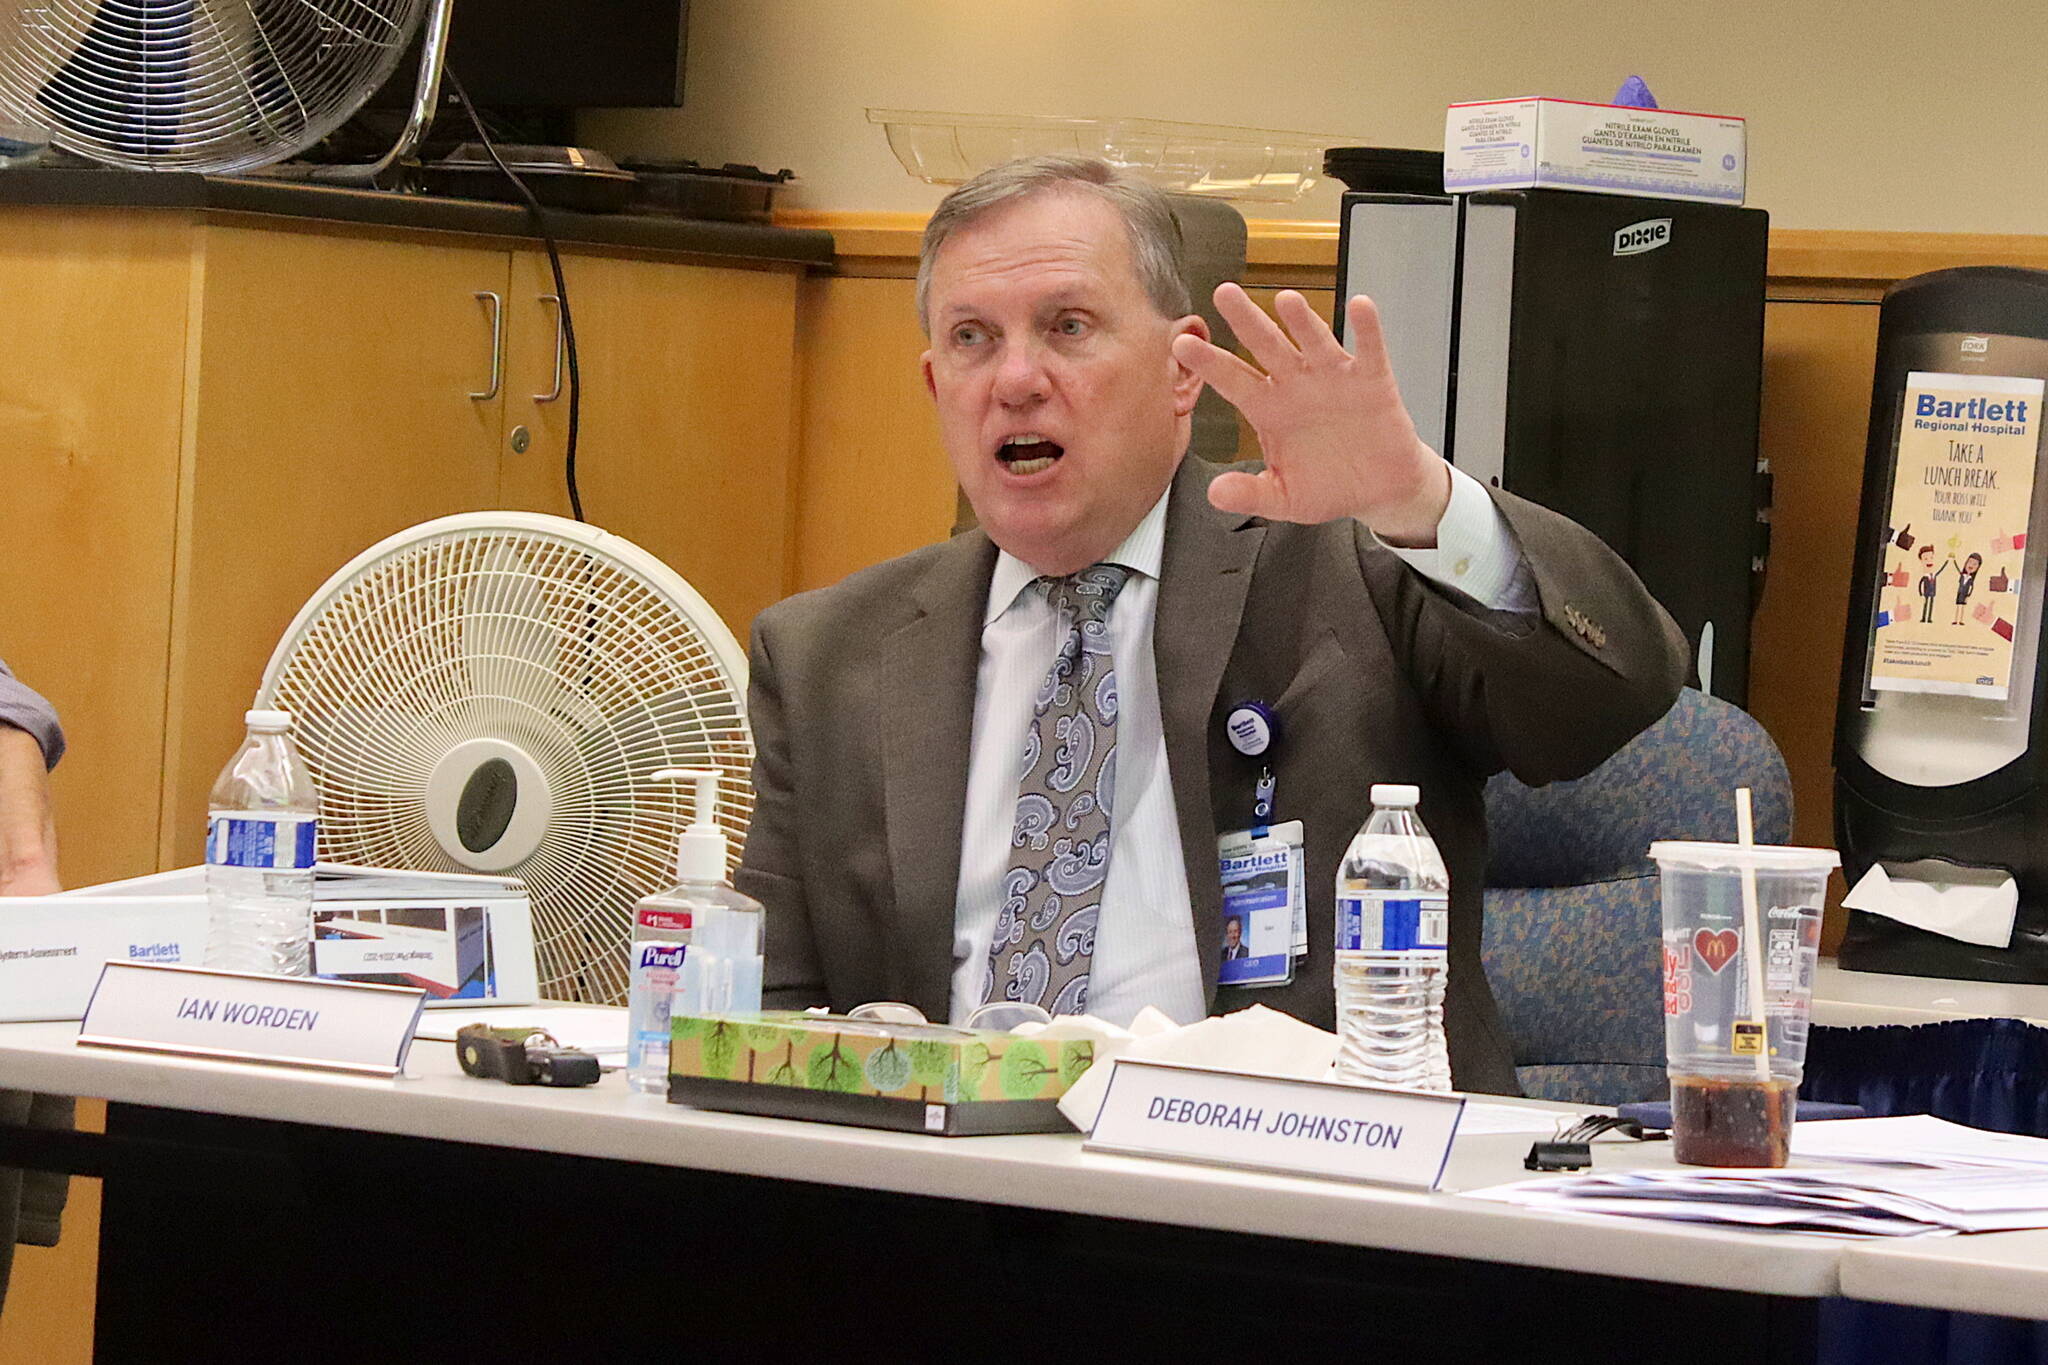 Ian Worden, interim CEO at Bartlett Regional Hospital, presents an update about the hospital’s financial situation during a board of directors meeting on Tuesday night. (Mark Sabbatini / Juneau Empire)